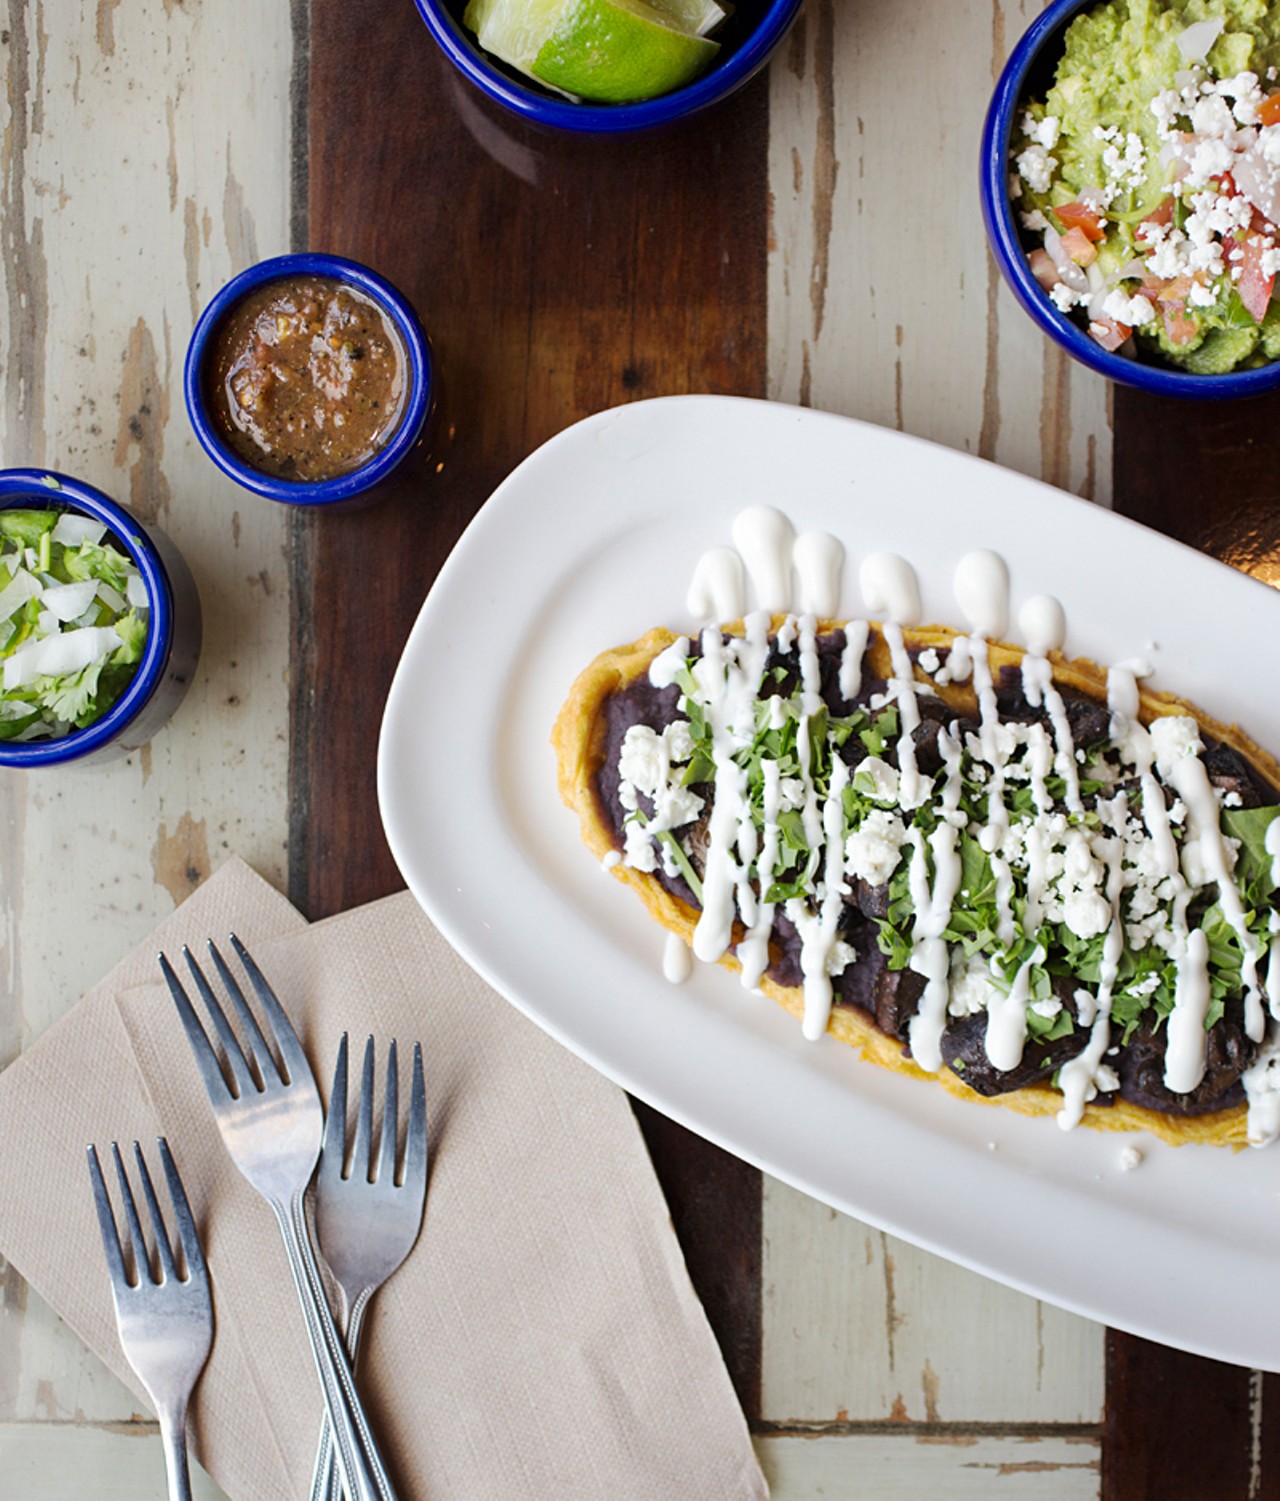 The "Wild Mushroom Huarache" is refried black beans, roasted mushrooms, uitlacoche, goat cheese, arugula and Mexican crema in a crisped corn masa boat. Shown here with the fresh-made guacamole, topped with pico de gallo and queso fresco.